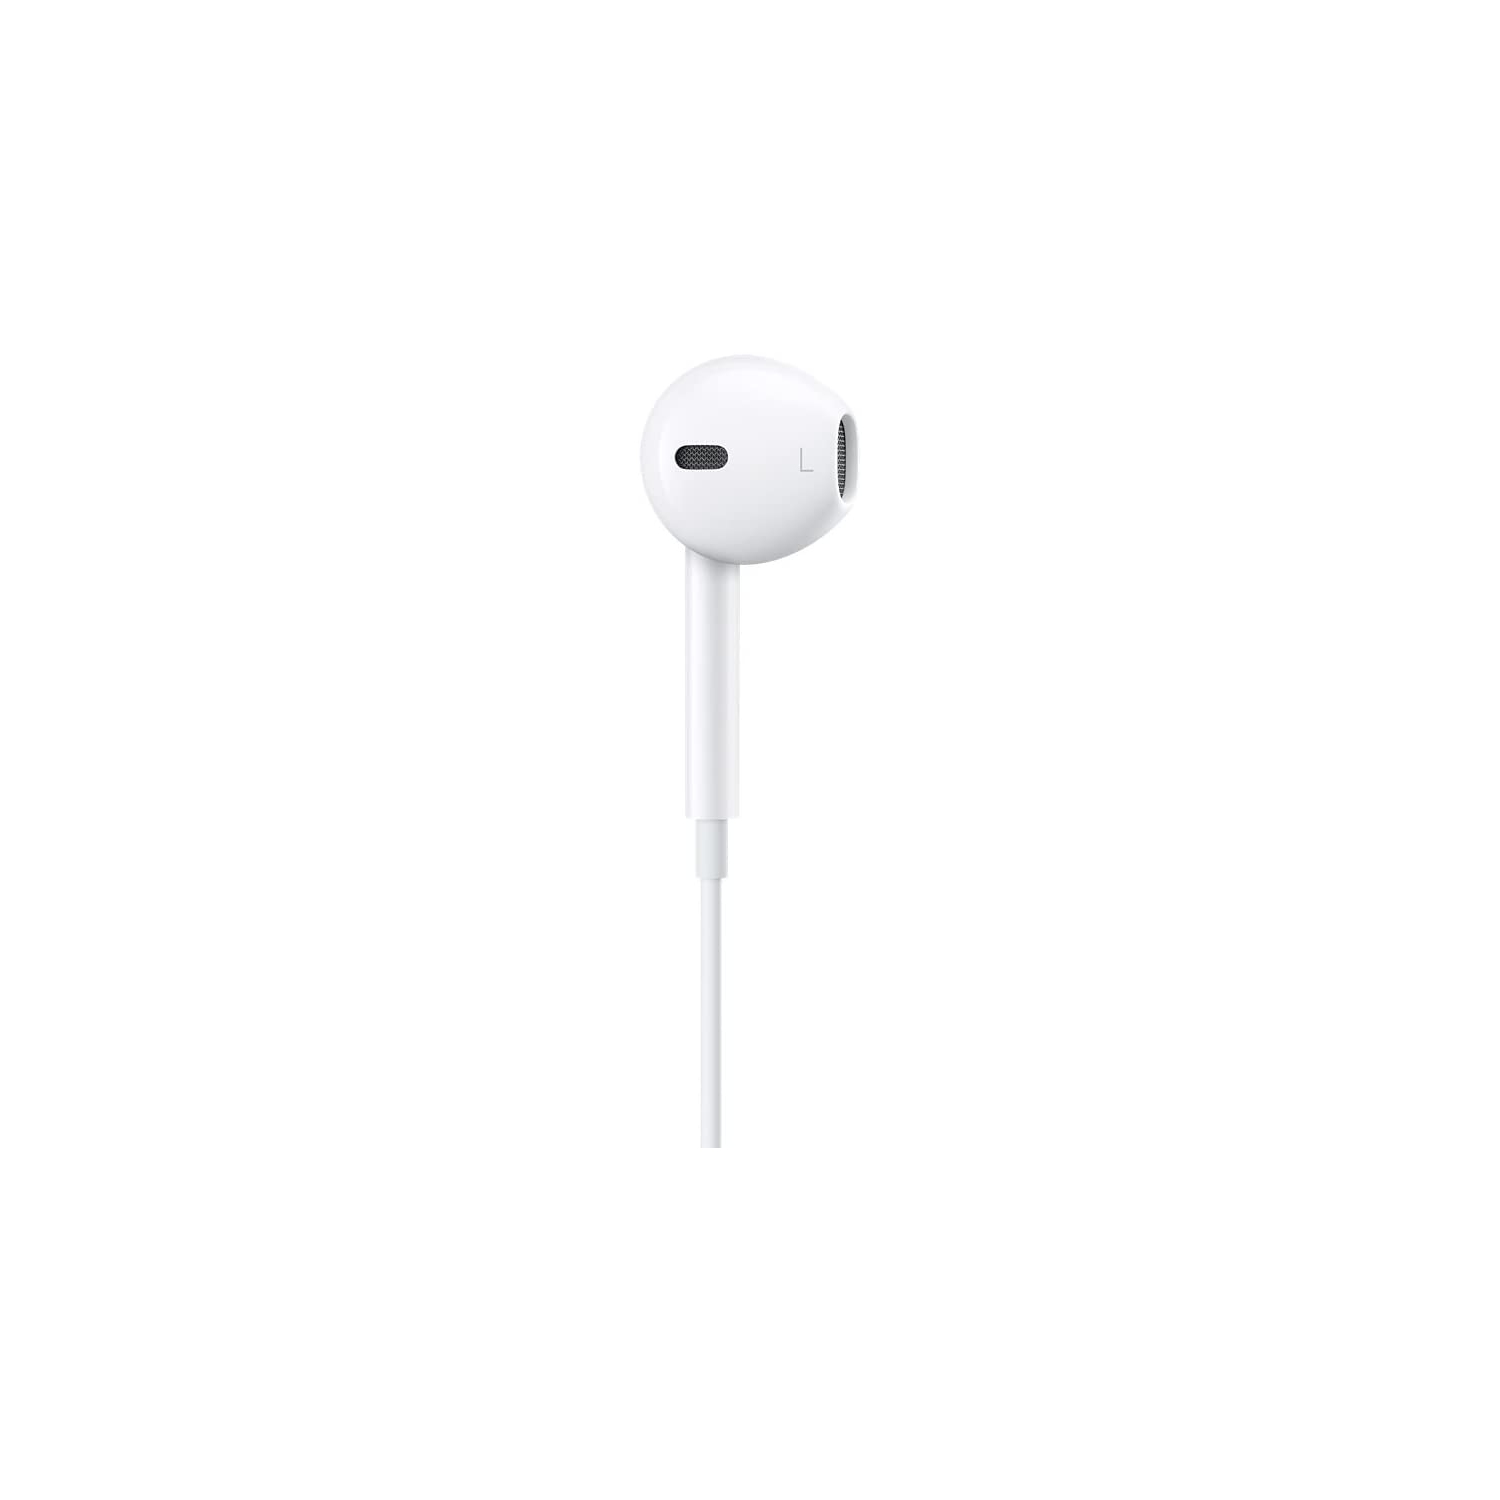 Apple EarPods In-Ear Headphones with Lightning Connector and Lightning to USB Cable (1m) Bundle - Open Box (10/10 condition)